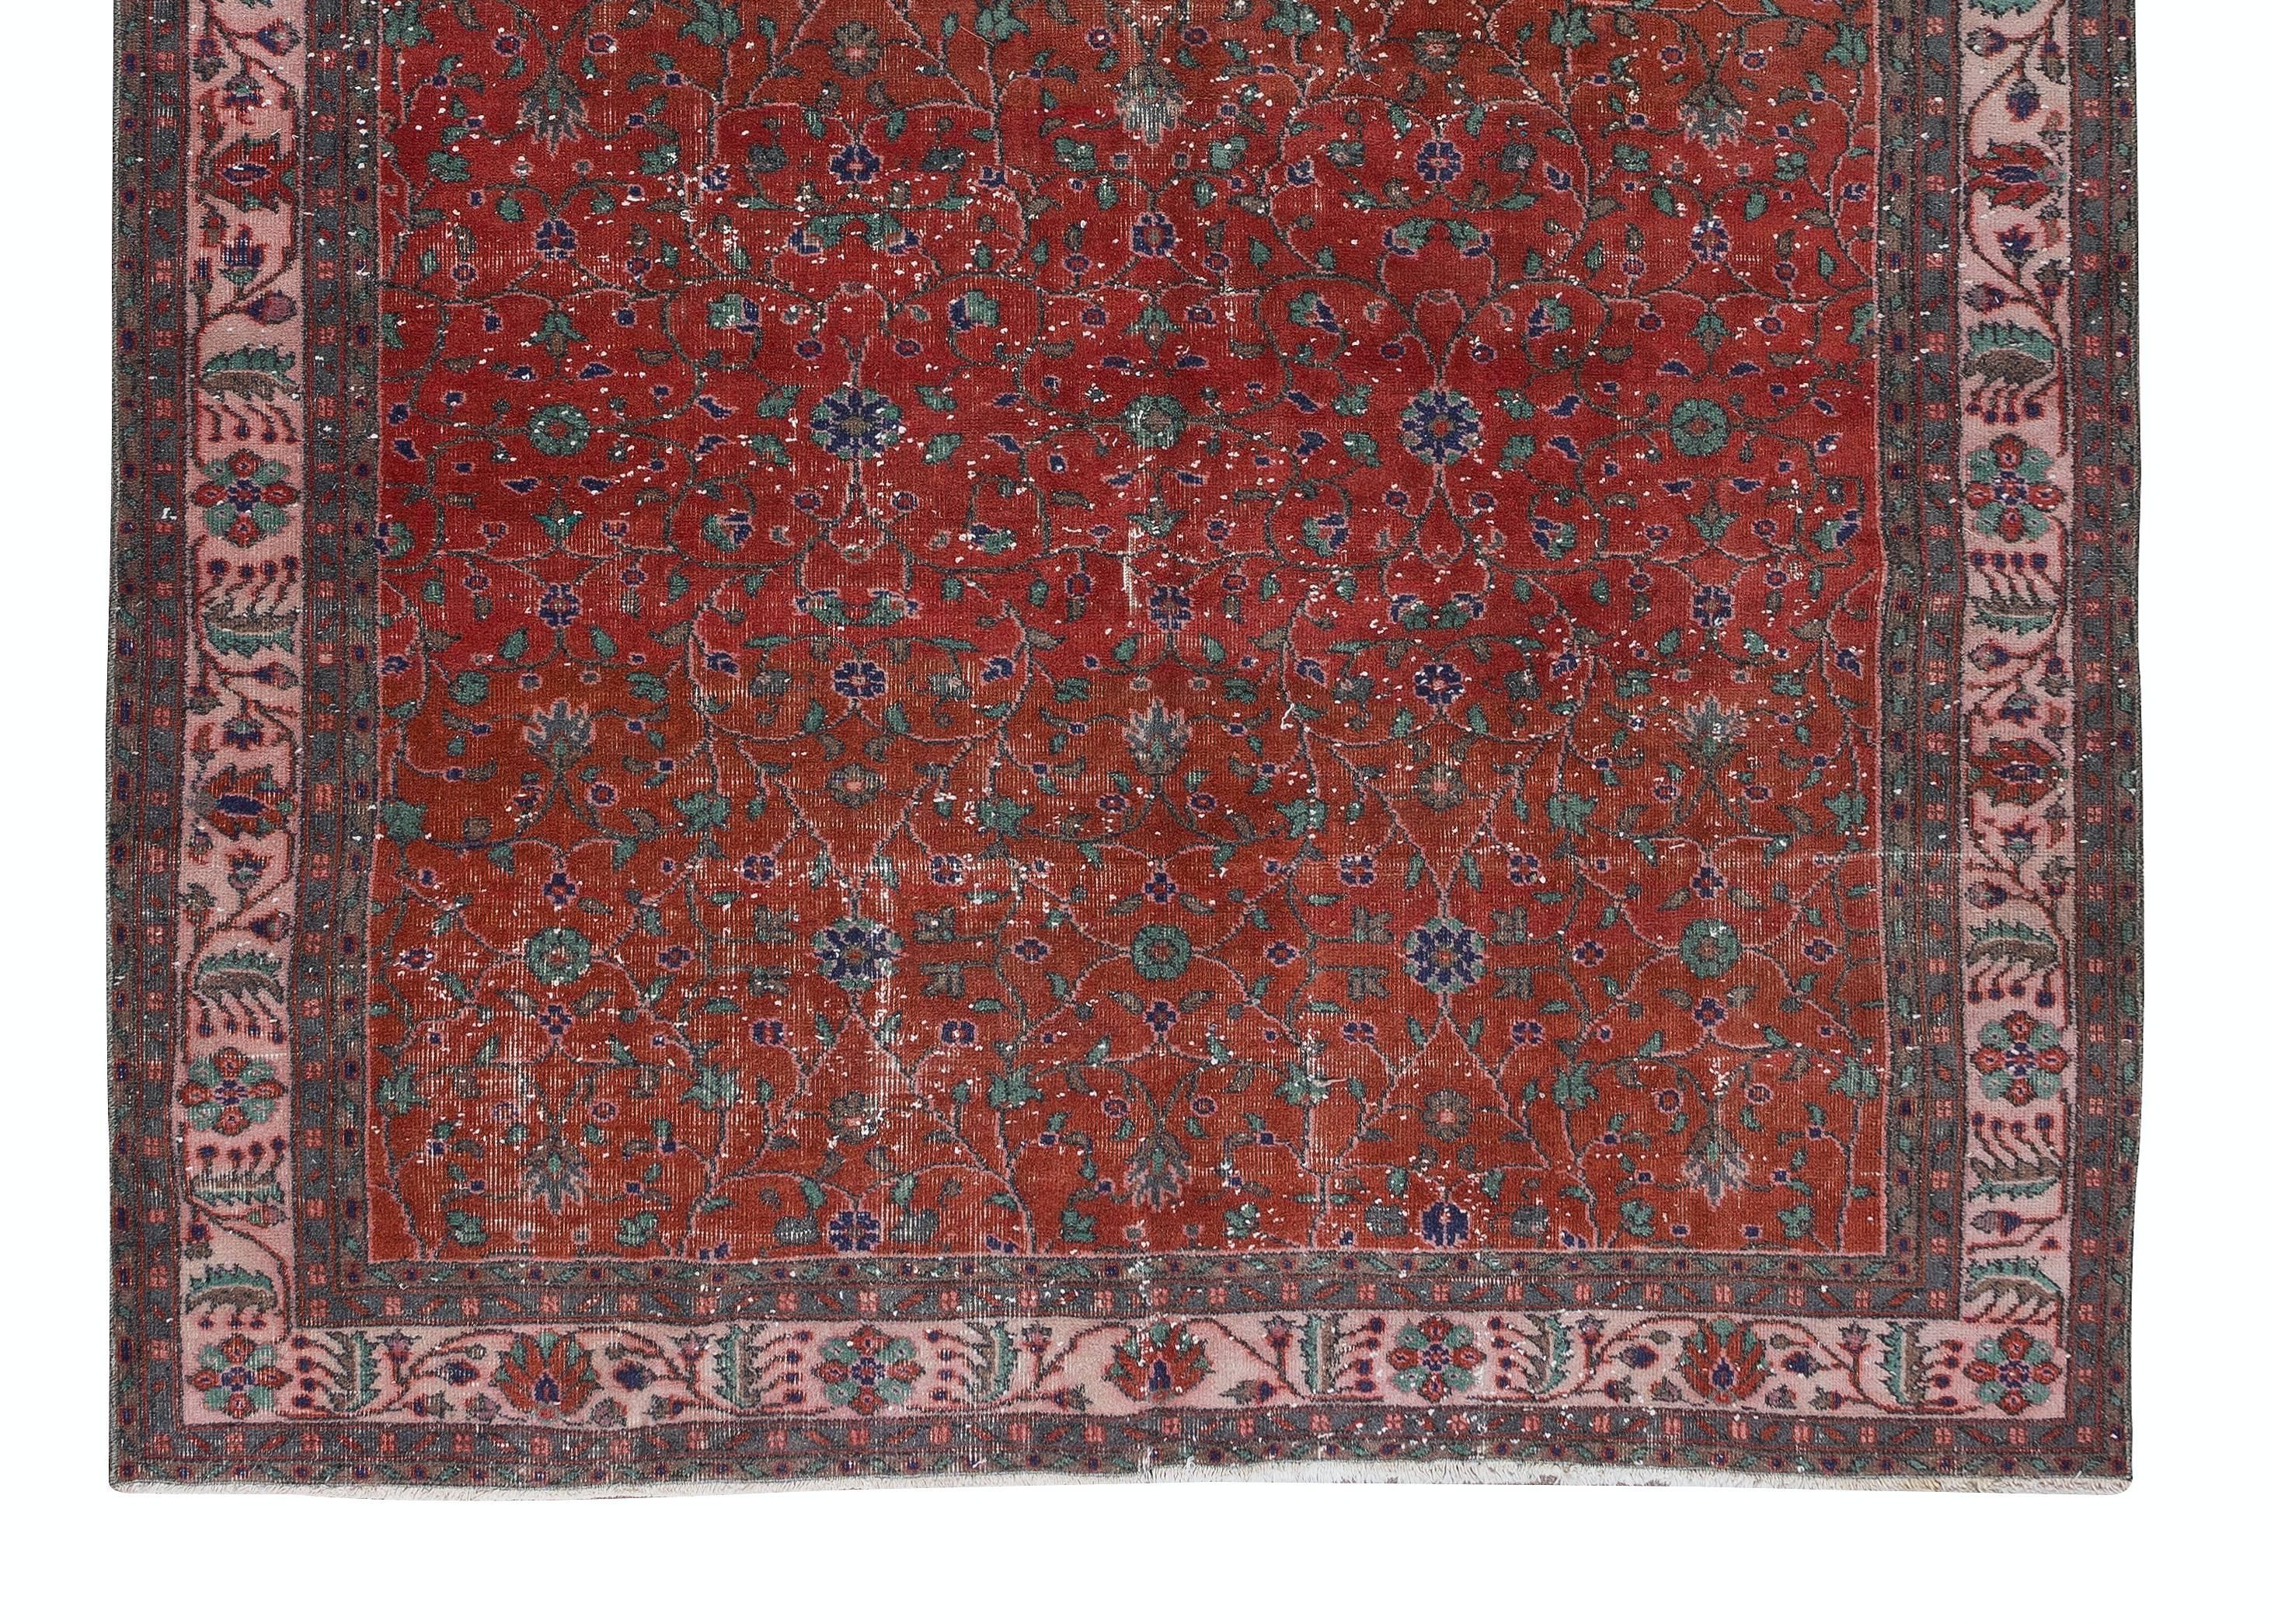 Hand-Knotted 7x10.4 Ft Traditional Handmade Vintage Turkish Rug in Red, Beige, Blue and Green